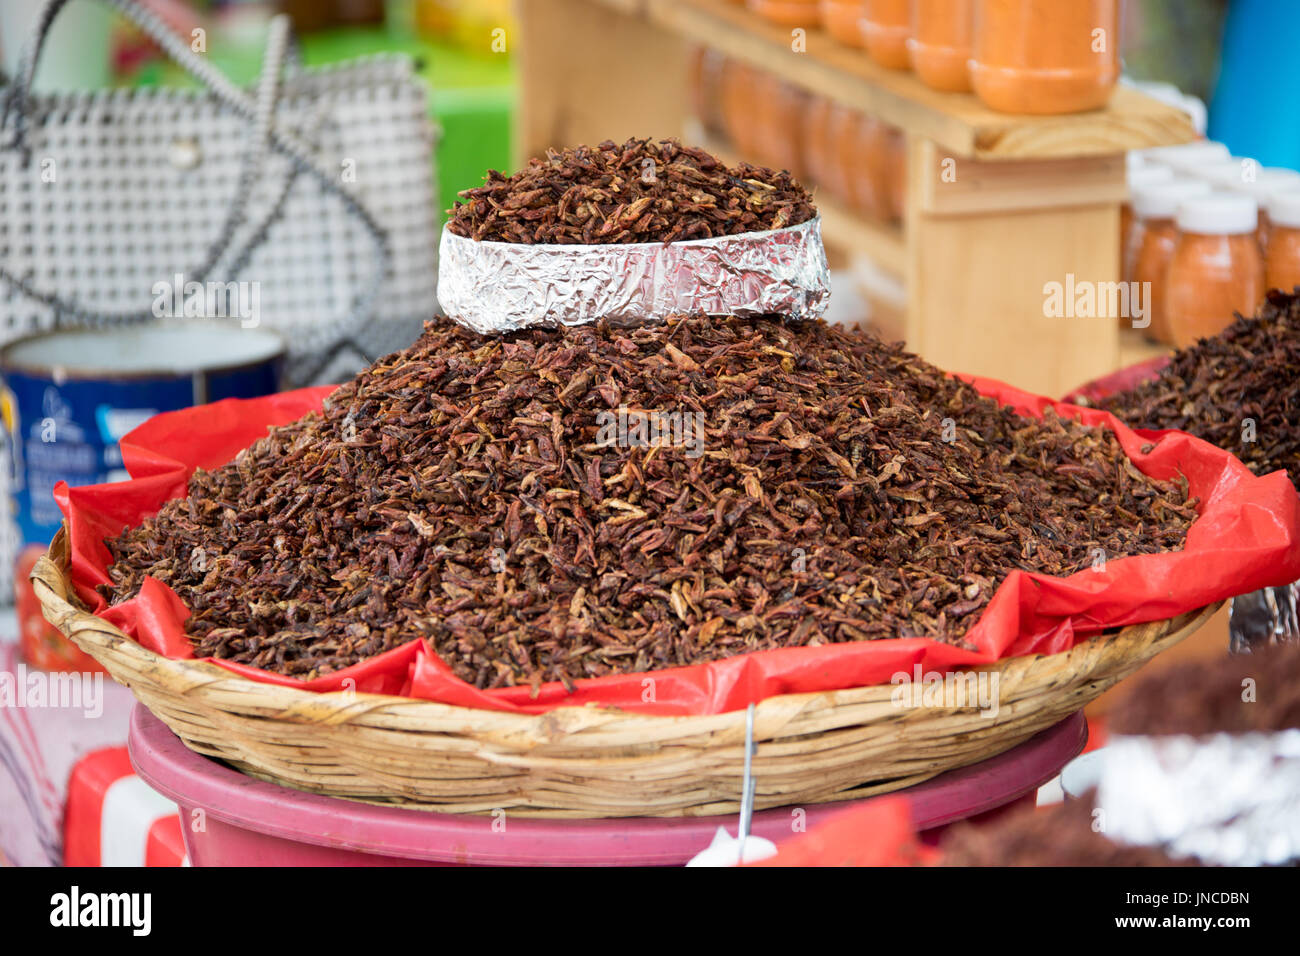 Fried insects vendor in Oaxaca, Mexico Stock Photo